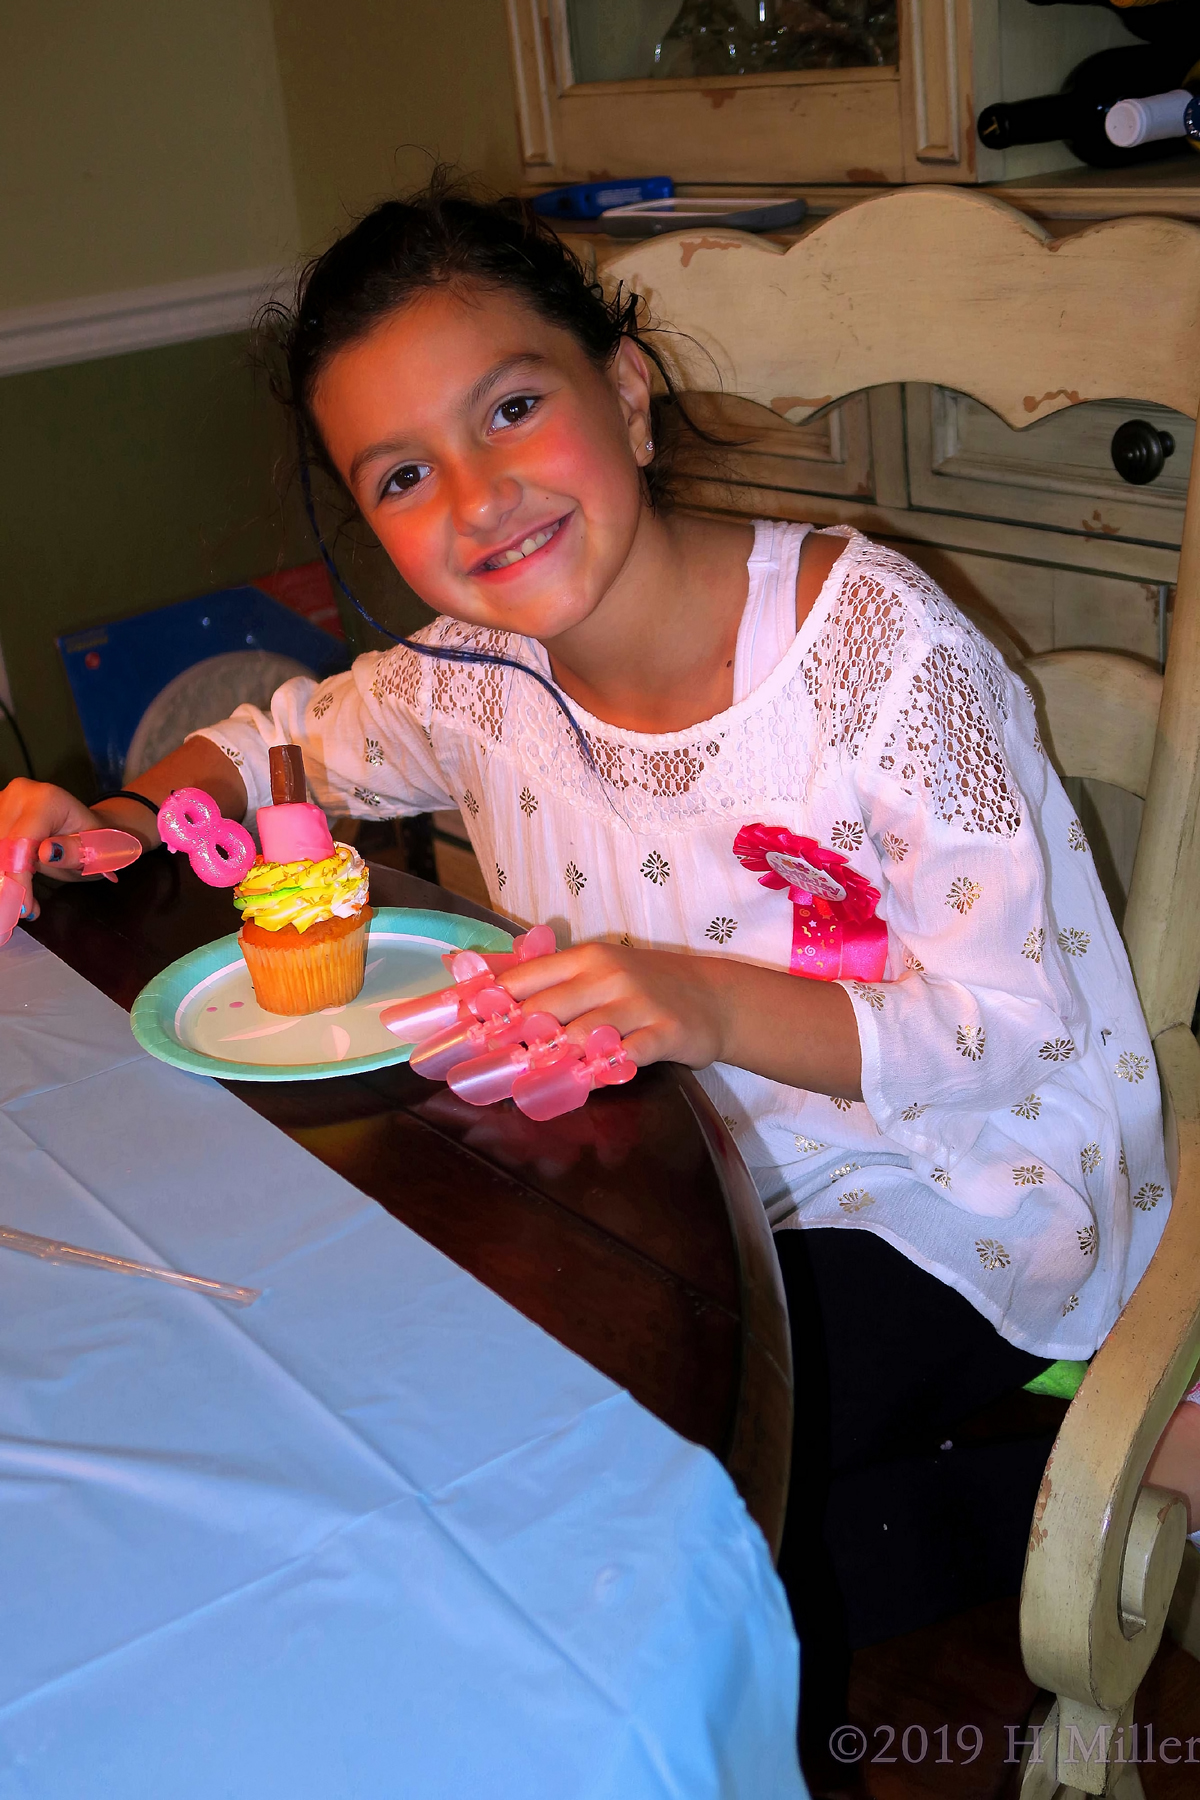 Blessings On Blessings! Birthday Girl Poses With Birthday Cupcake!